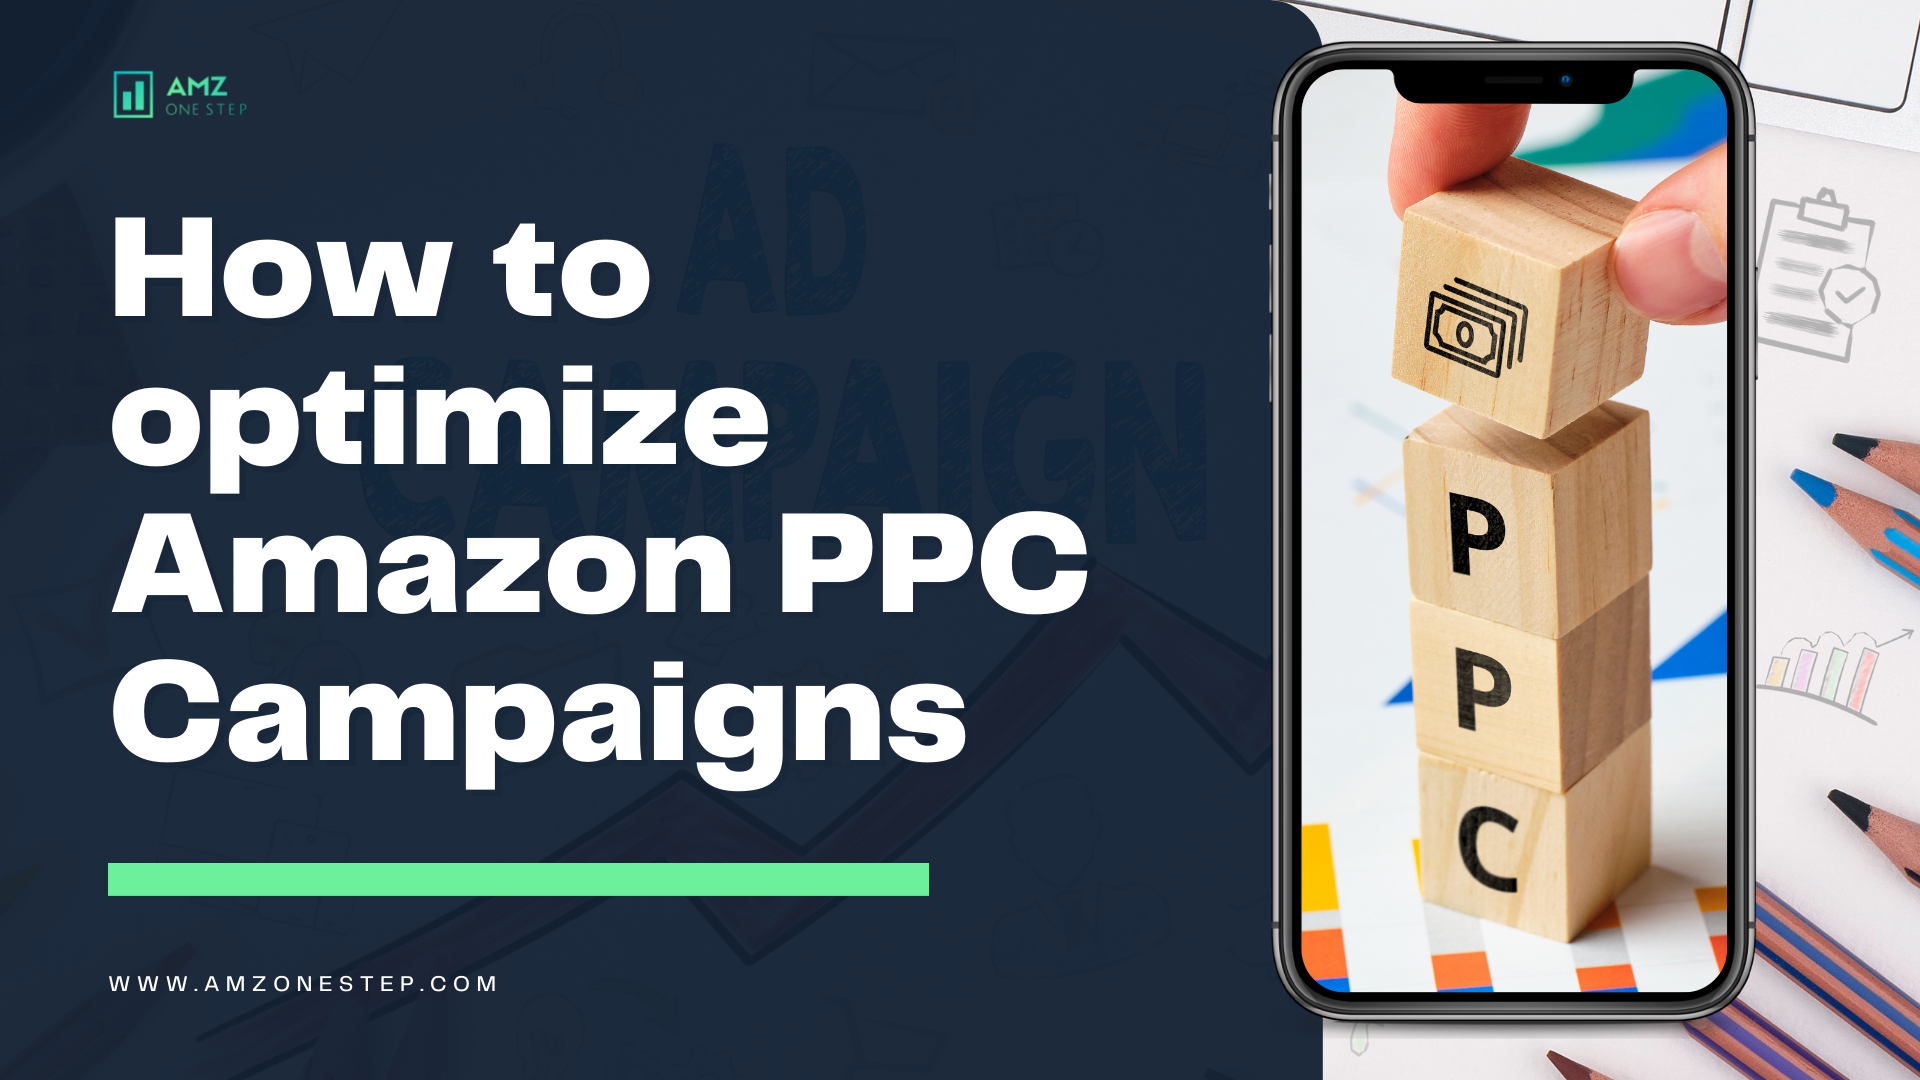 5 Expert Tips to Optimize Amazon PPC campaigns